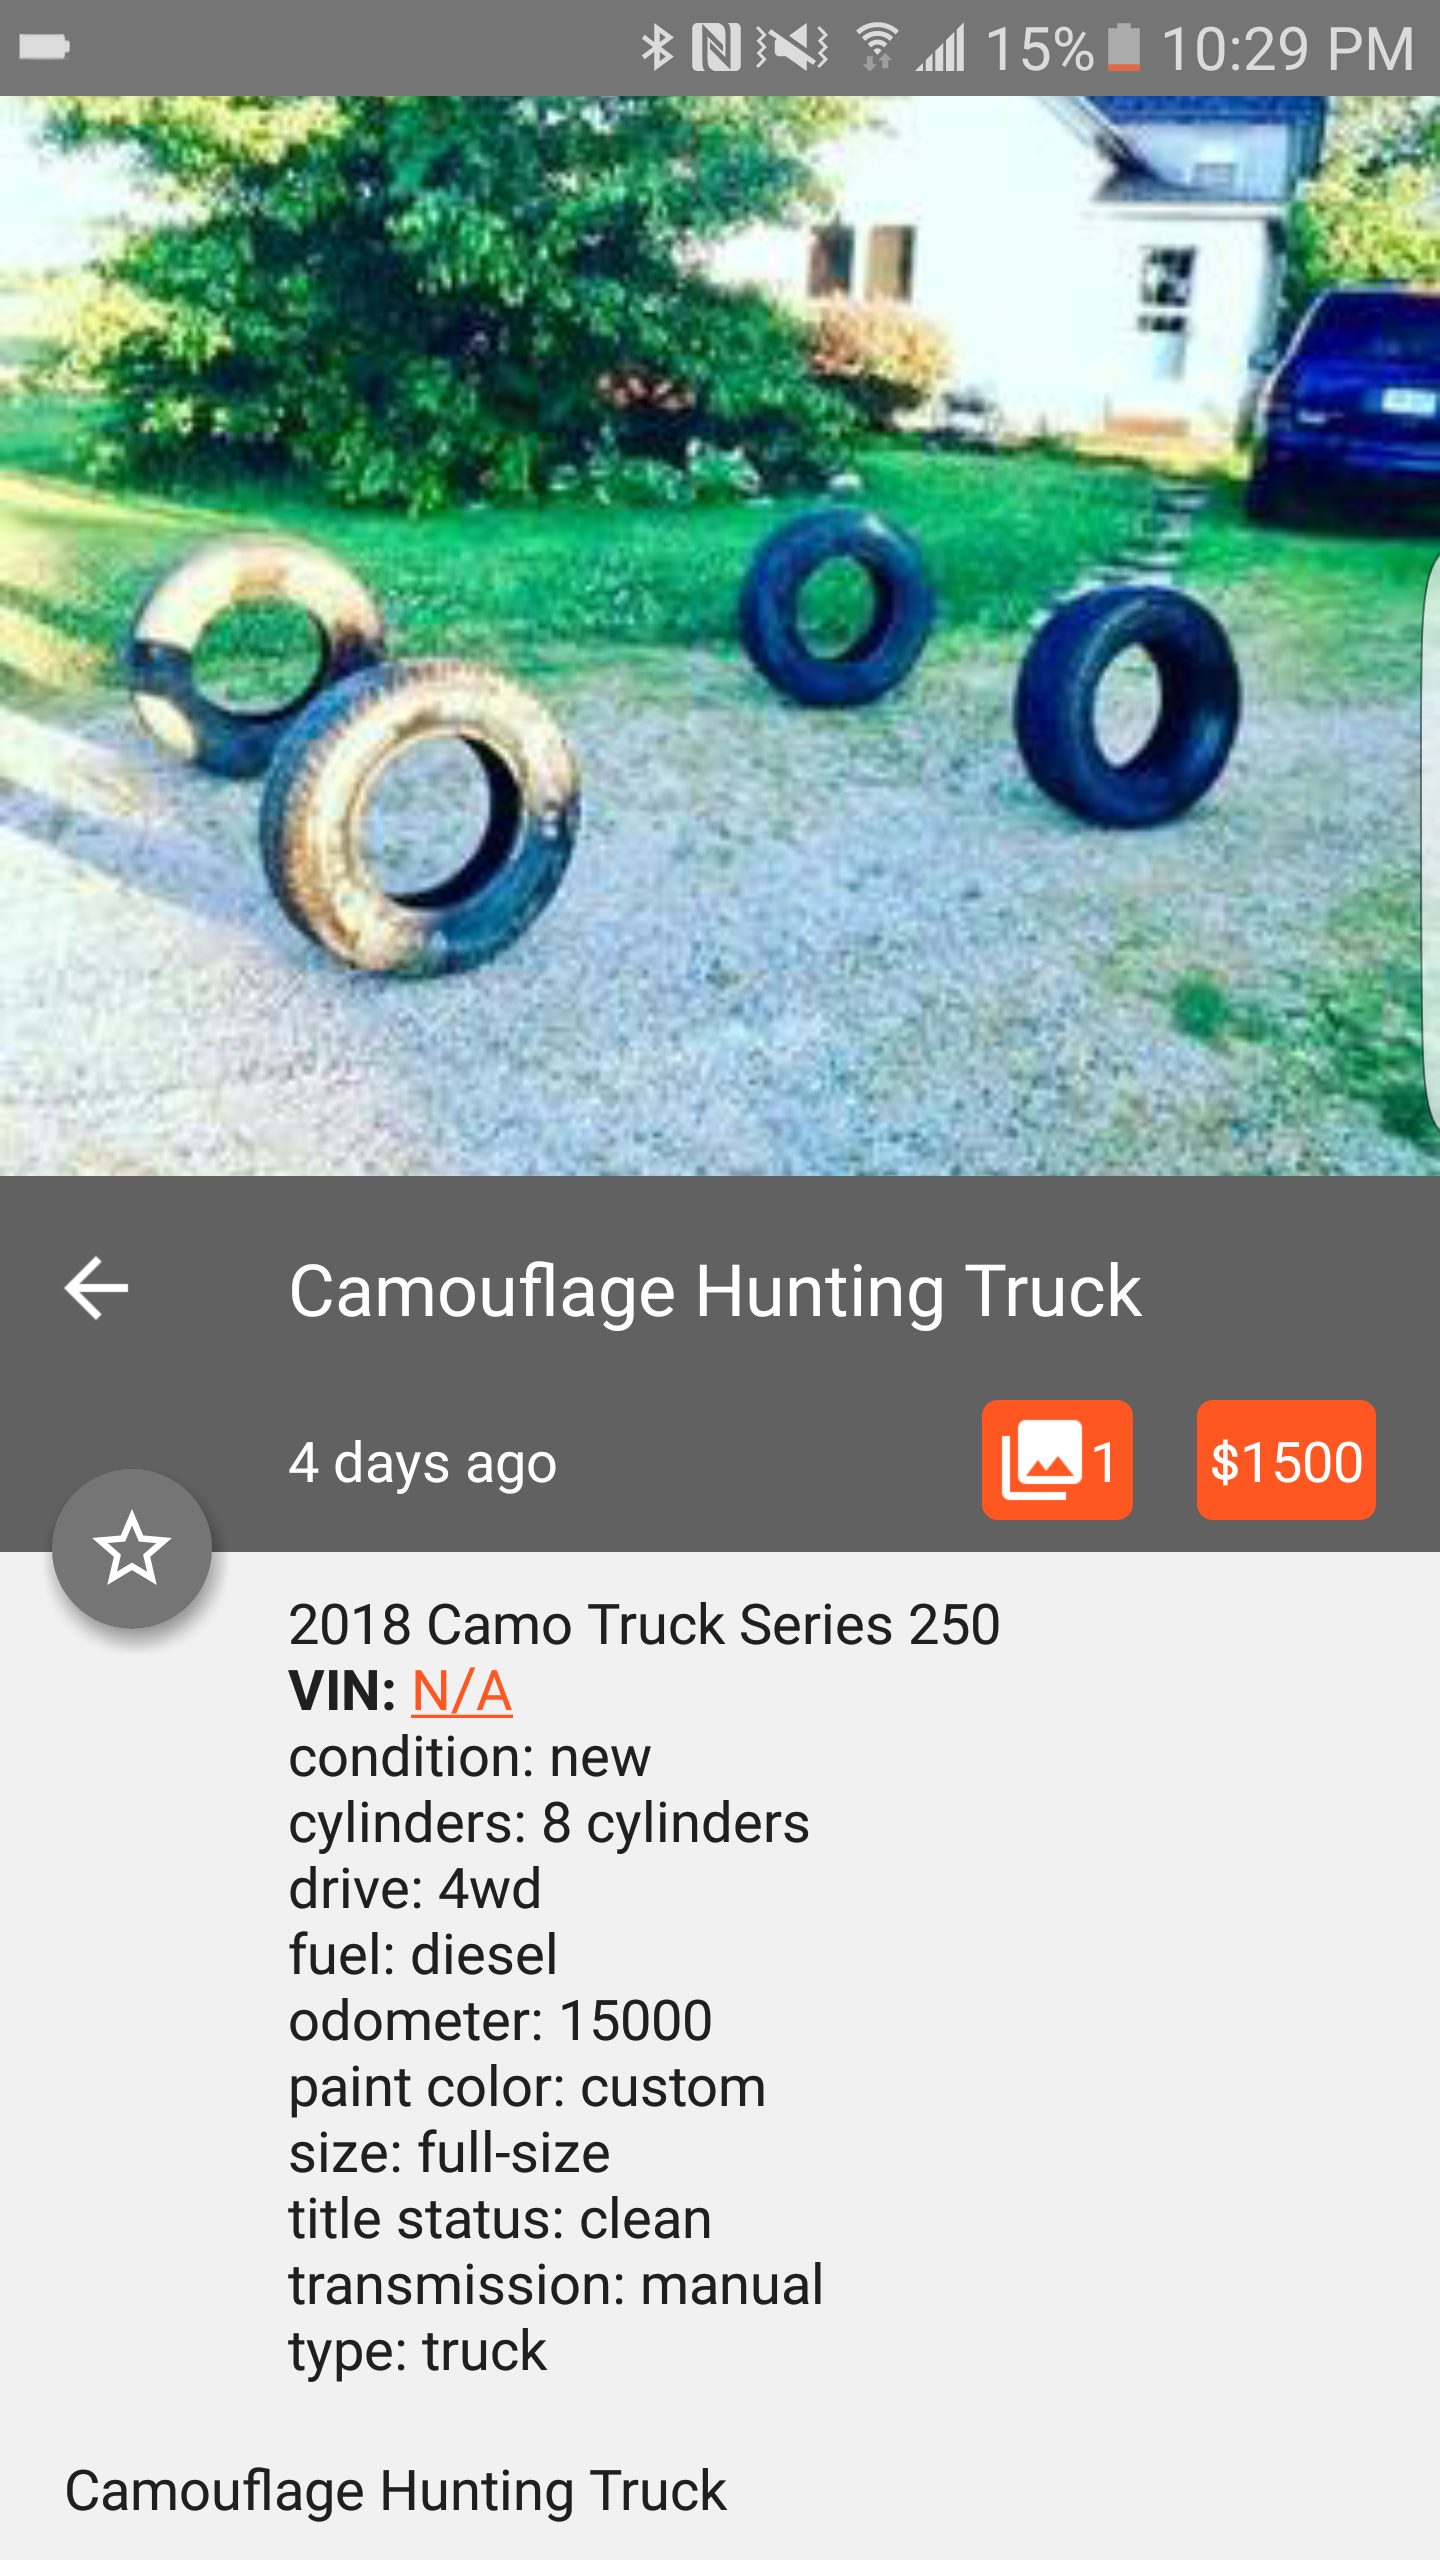 Thinking about buying a new truck...